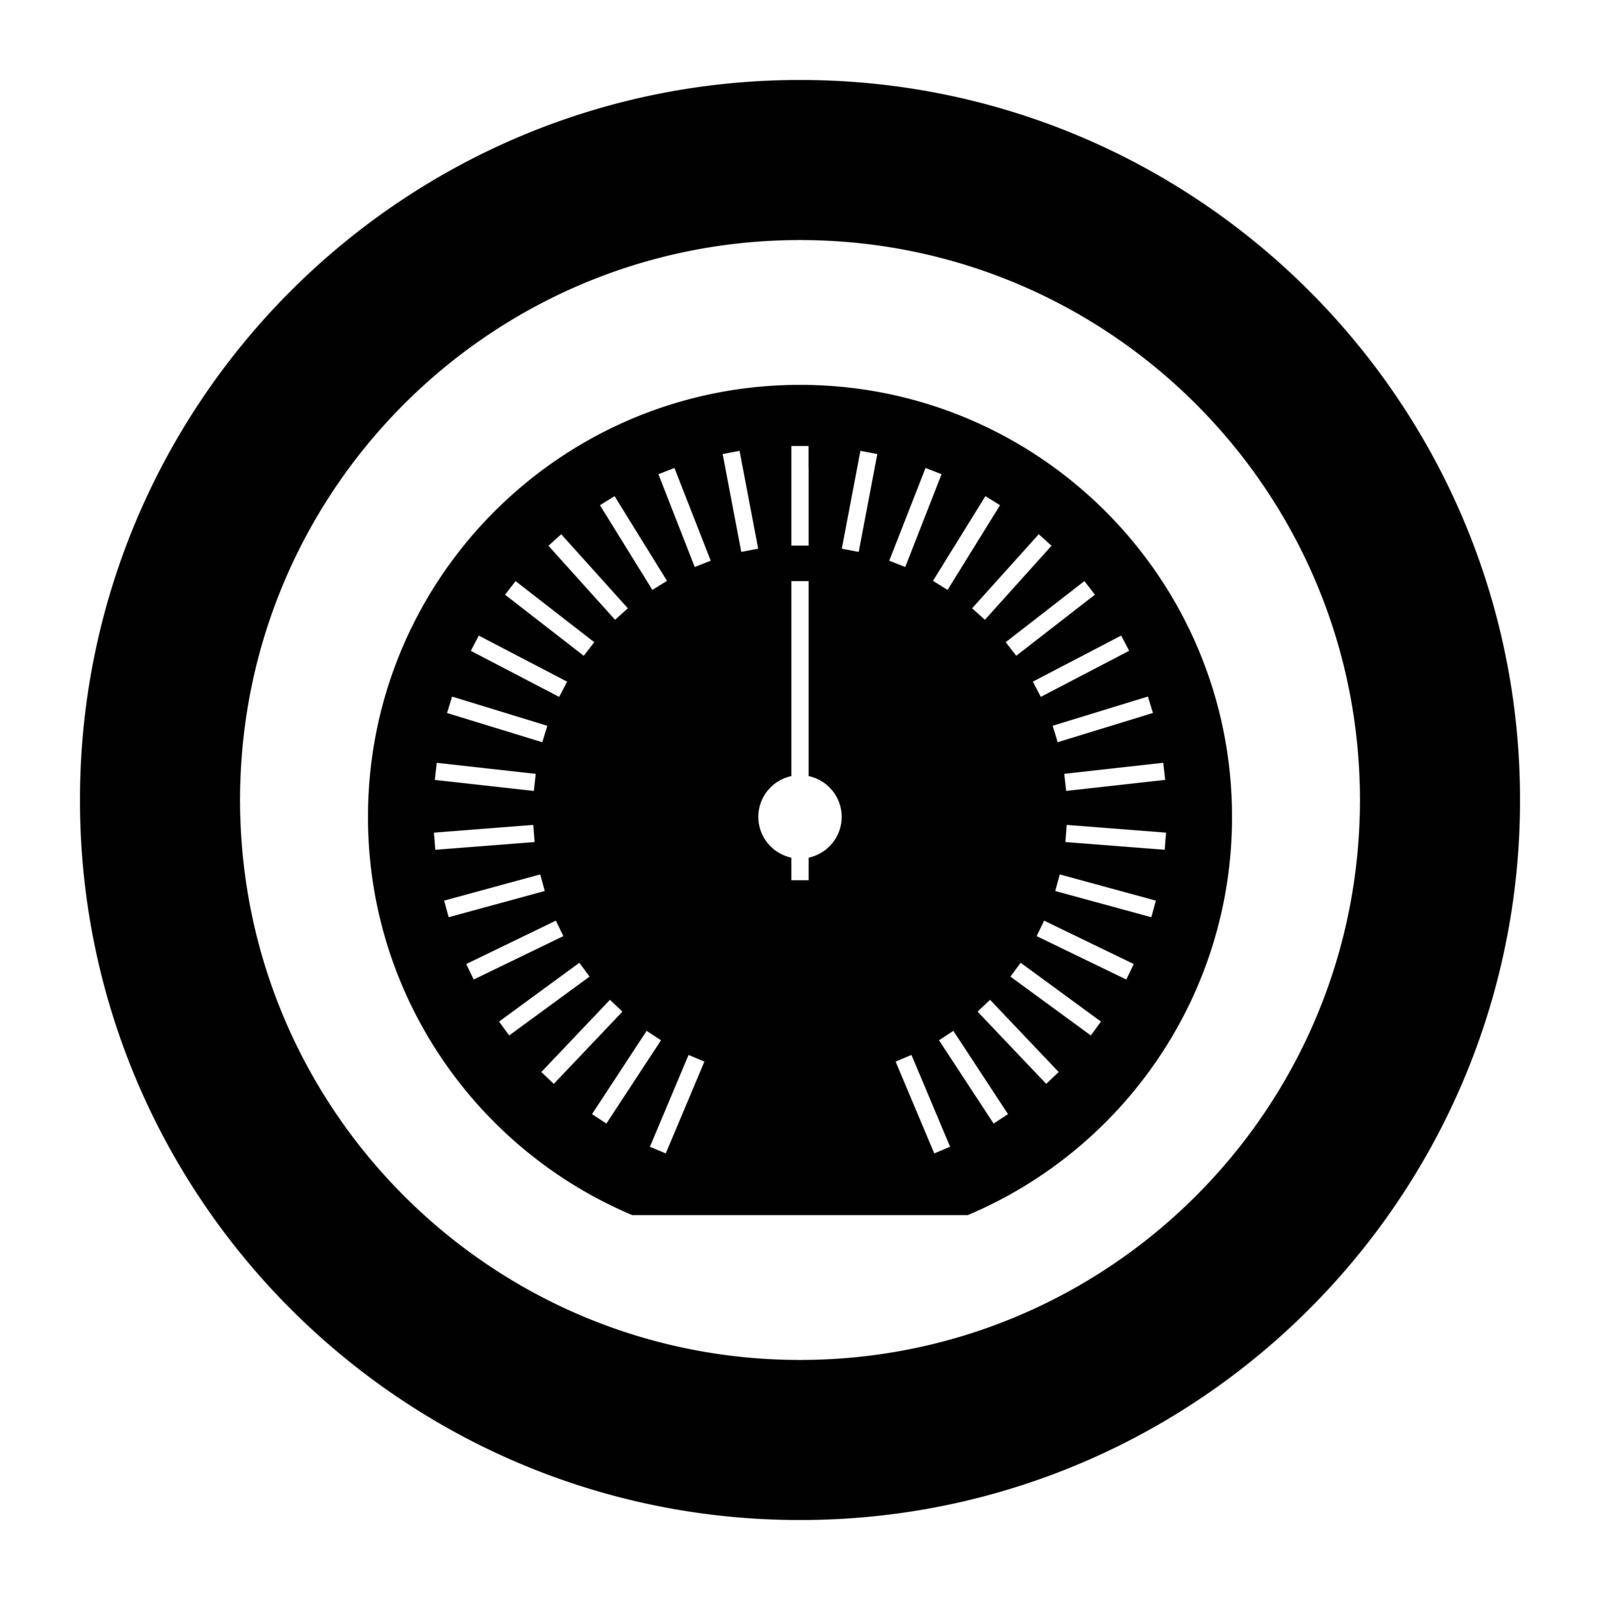 Speedometer odometer speed counter meter icon in circle round black color vector illustration image solid outline style by serhii435